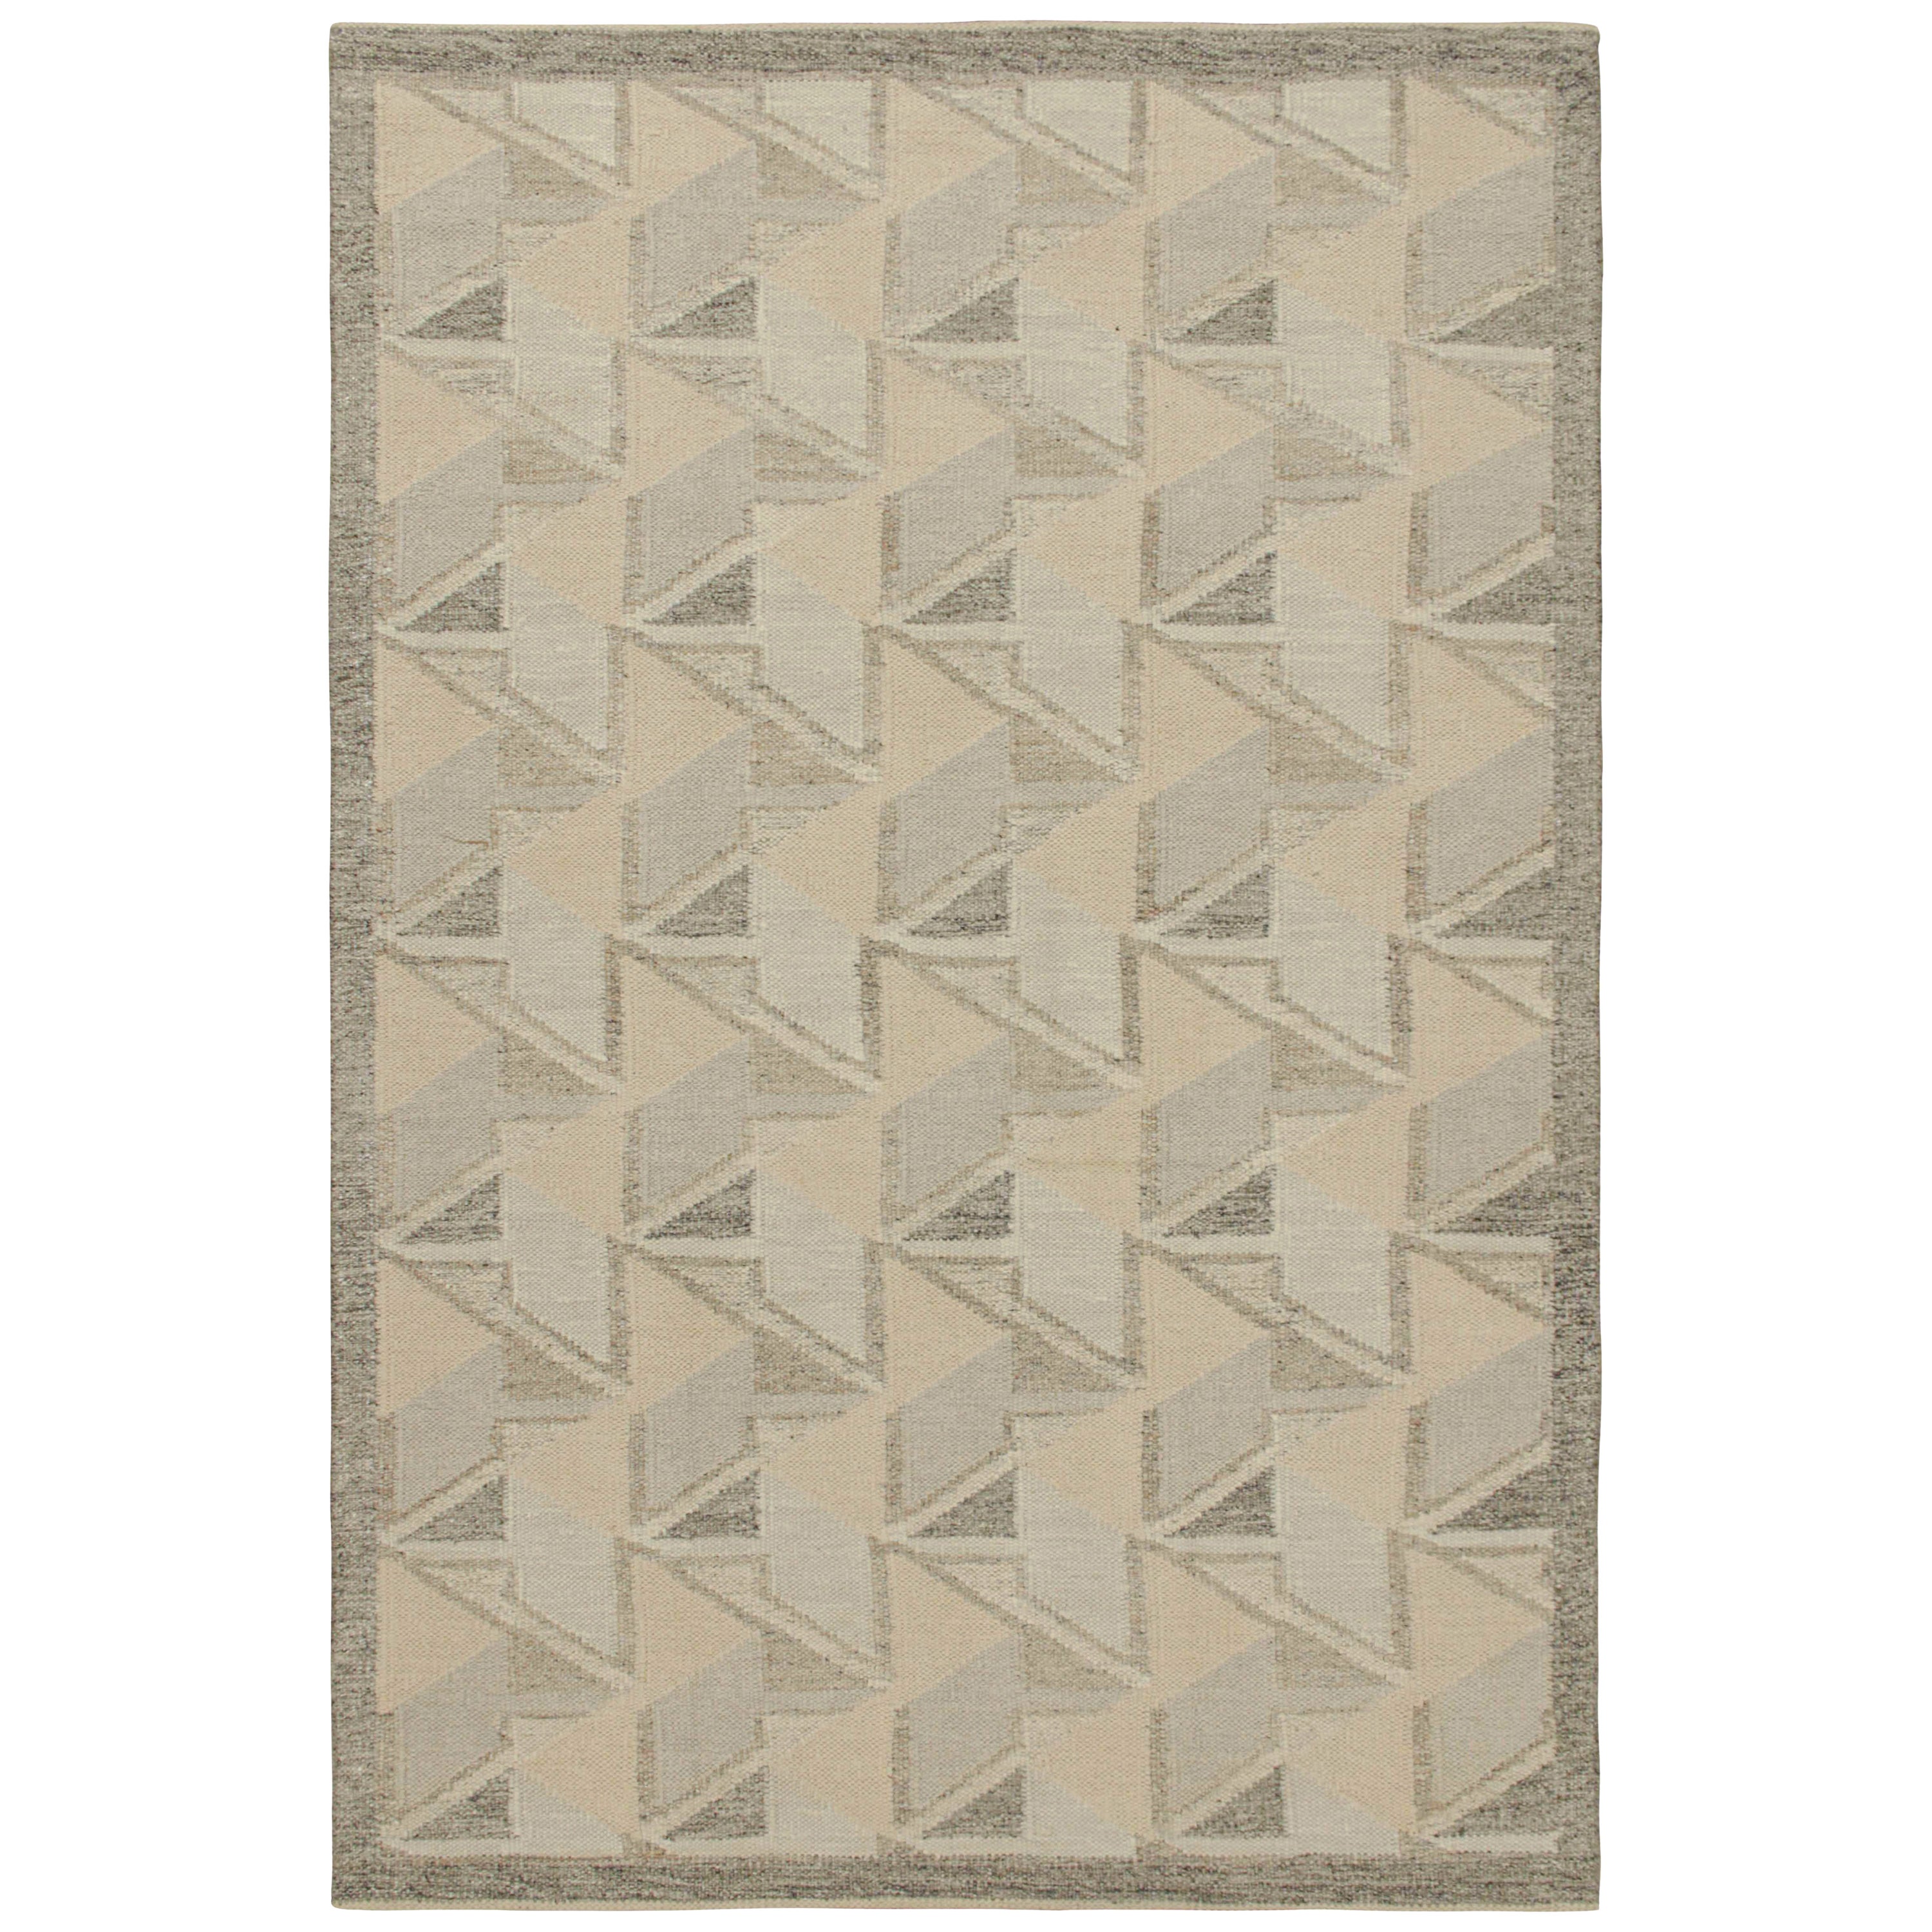 Rug & Kilim’s Scandinavian Style Kilim in White and Blue Geometric Patterns For Sale